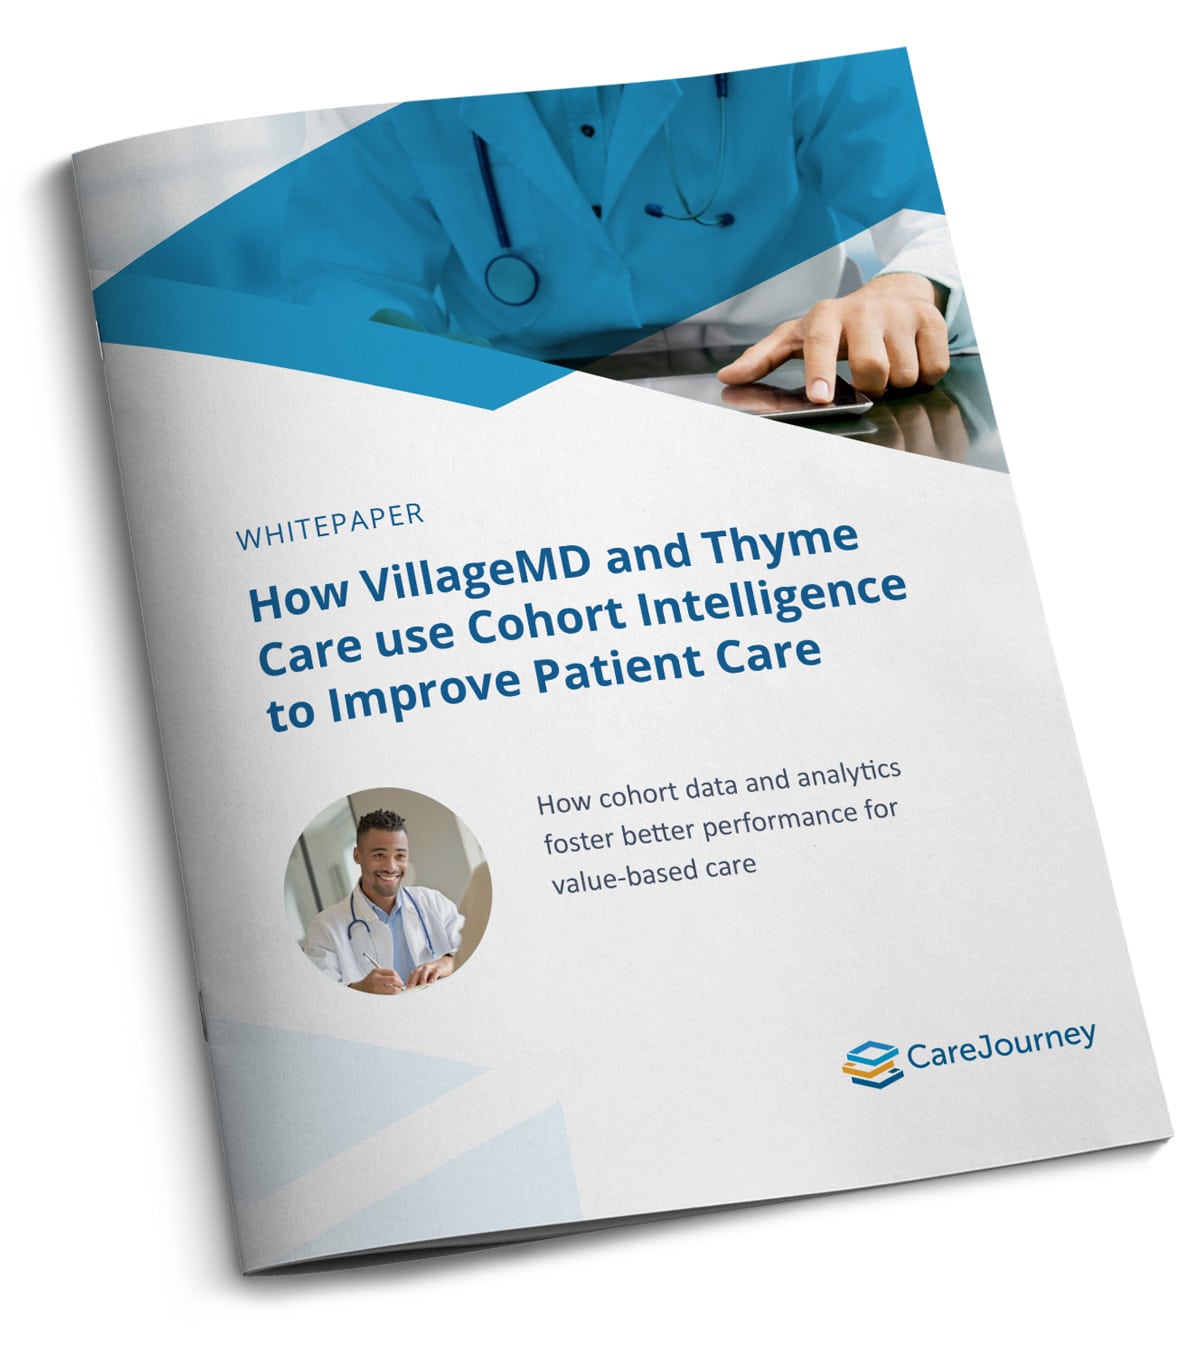 Whitepaper: How Rush and Banner Health Use Data to Retain Patients and Improve Care